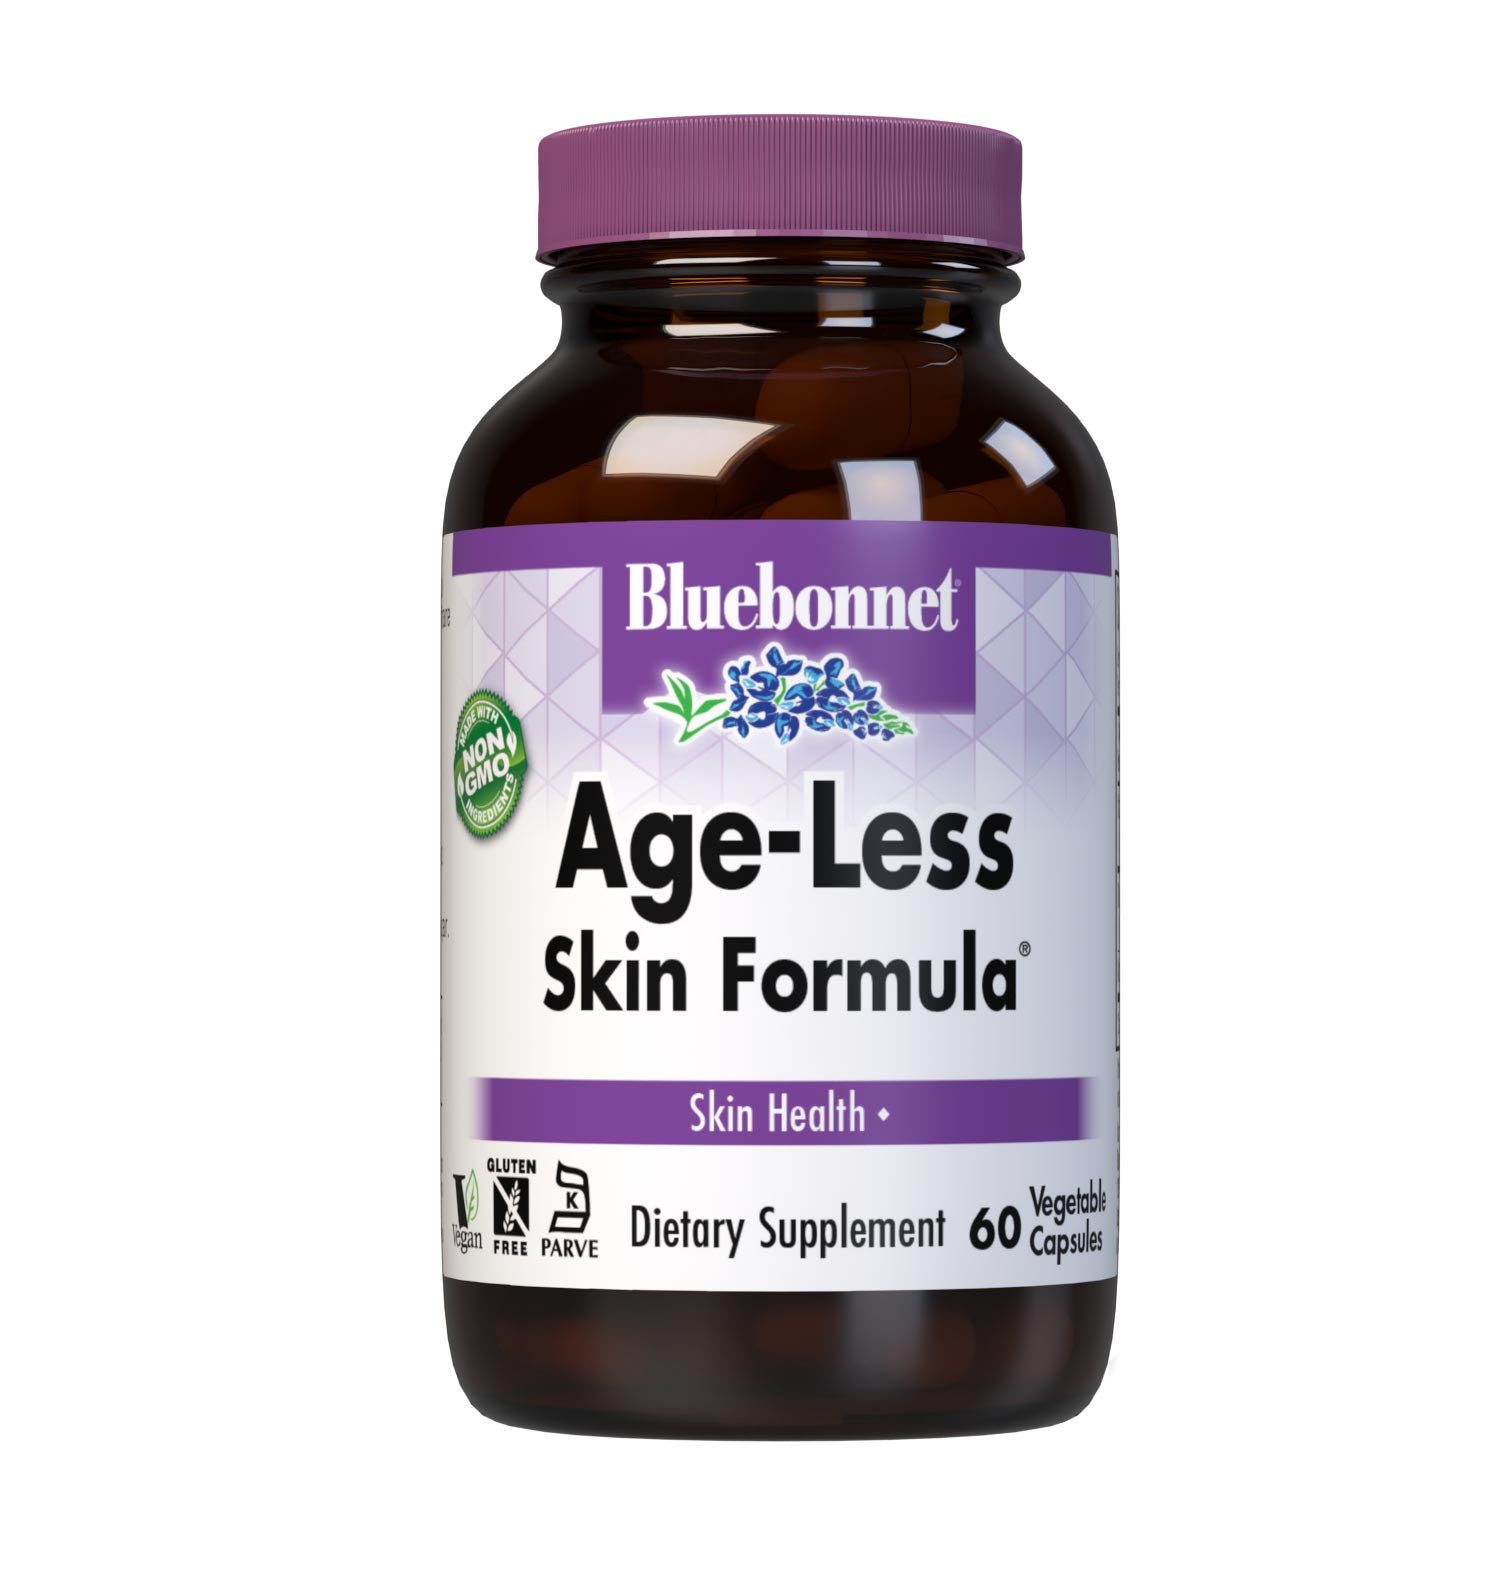 Bluebonnet’s Age-Less Skin Formula 60 Vegetable Capsules are formulated with a combination of vitamin C from ascorbyl palmitate, DMAE and alpha lipoic acid to help support skin health by boosting collagen production. #size_60 count